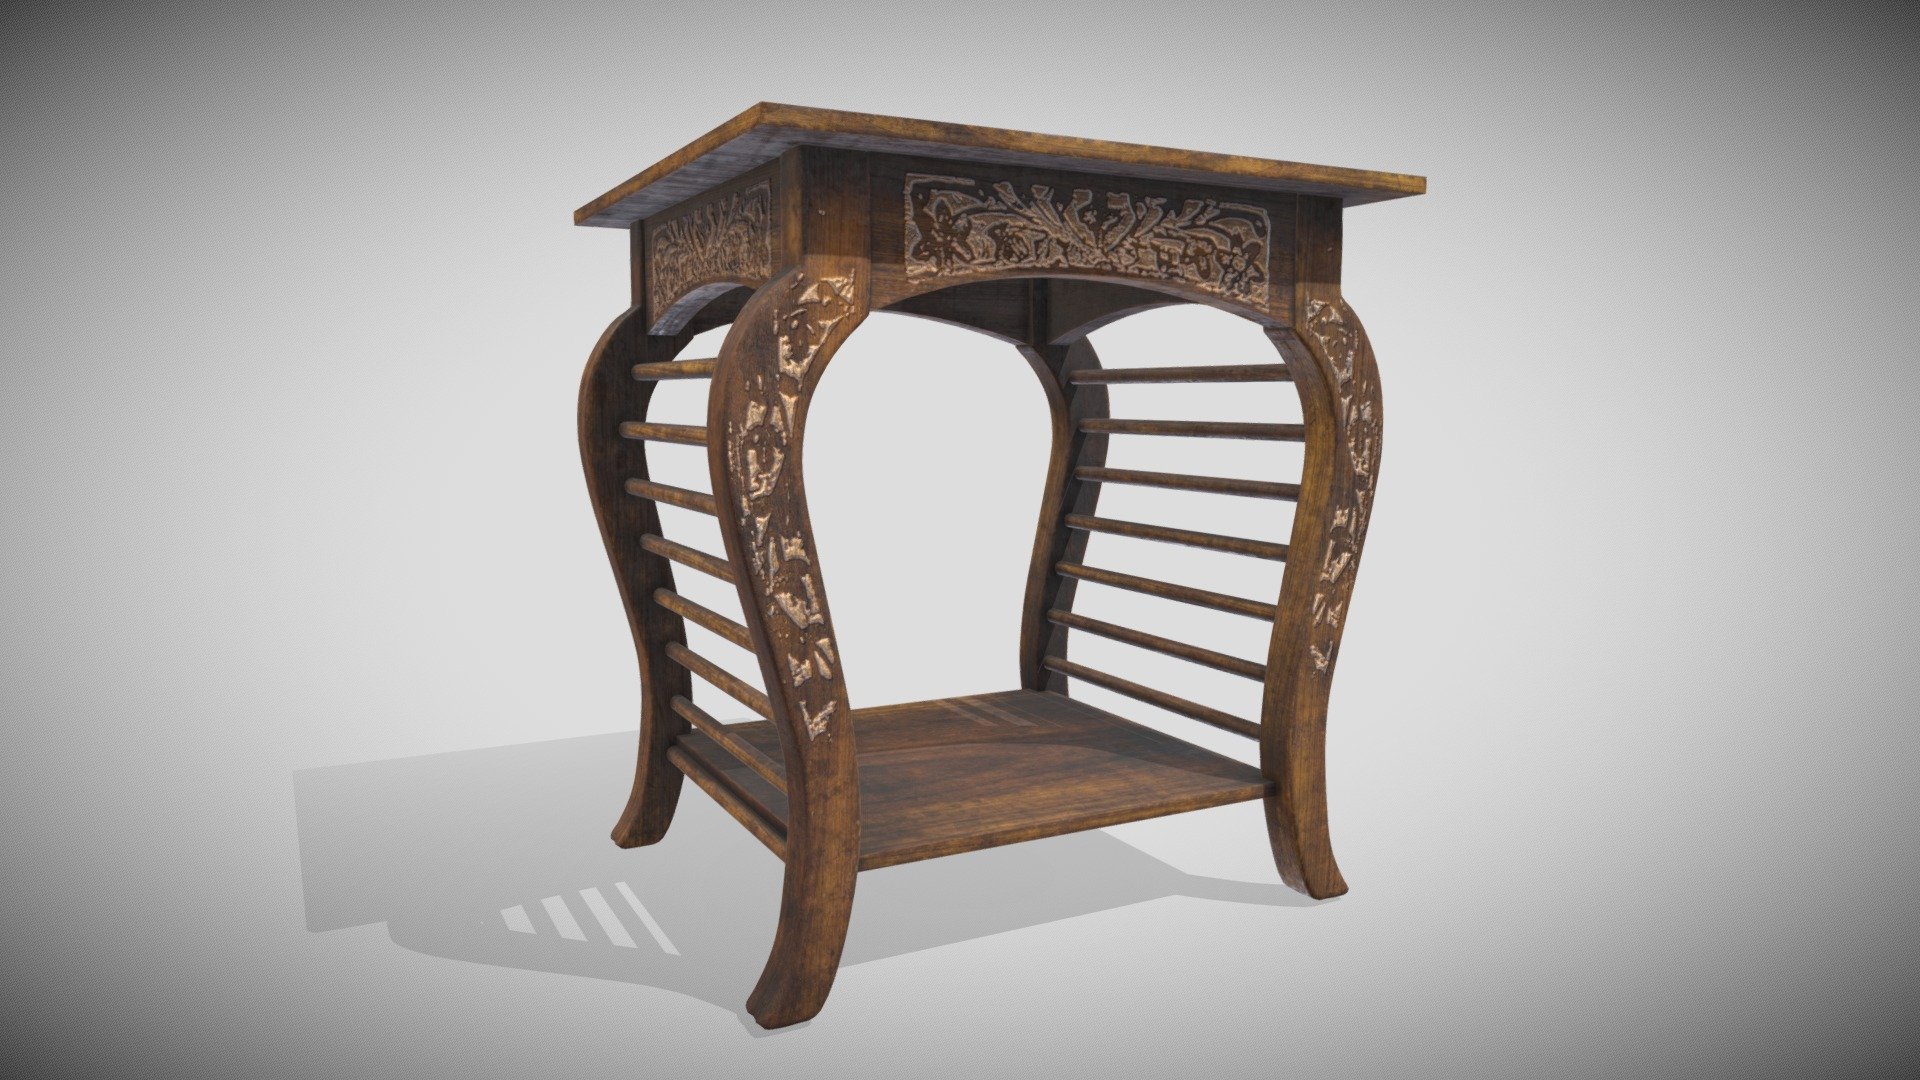 One Material PBR Metalness 4k
Quads - Smoothable - Small Table Curvolo - Buy Royalty Free 3D model by Francesco Coldesina (@topfrank2013) 3d model